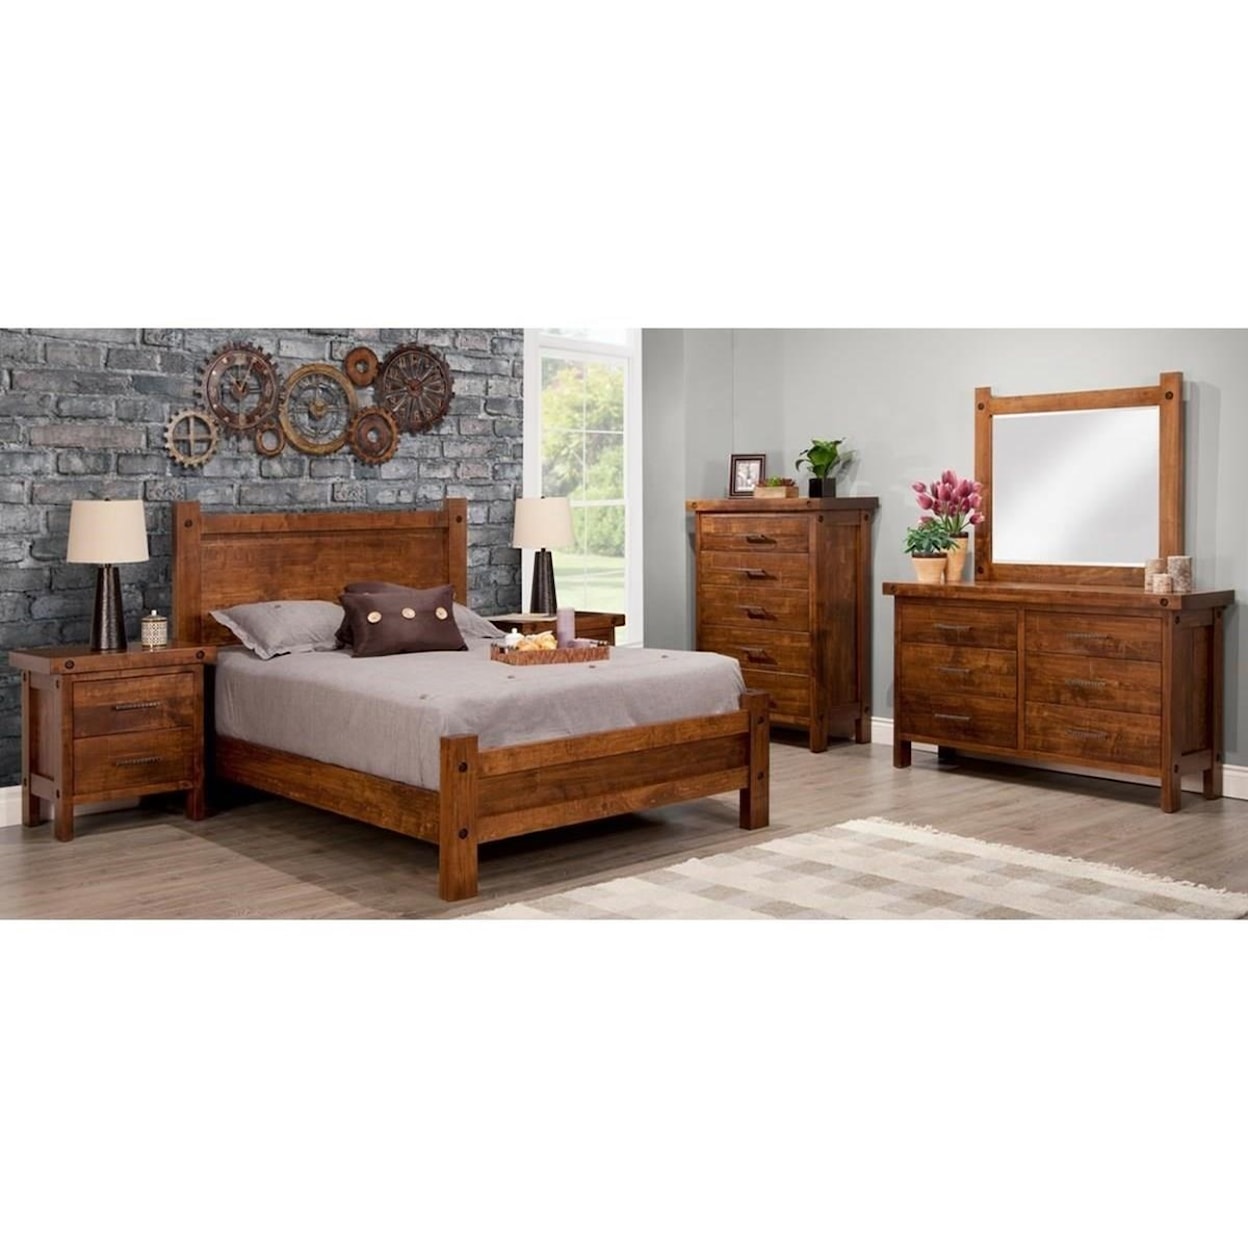 Handstone Rafters King Bed with Low Footboard